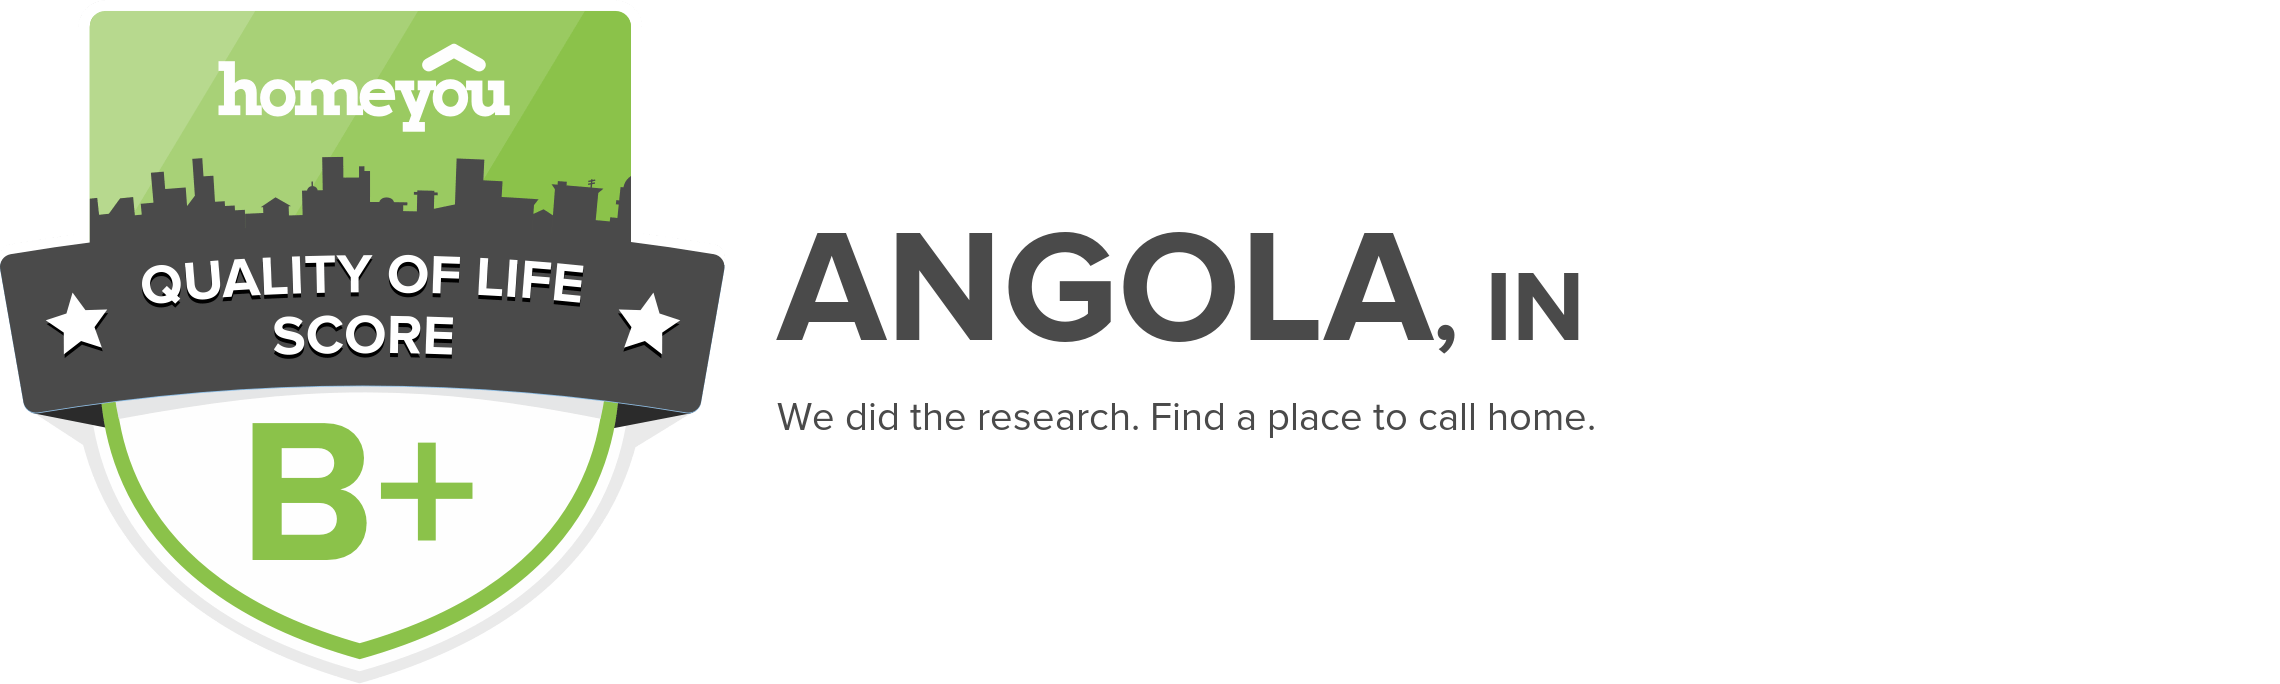 Angola, IN